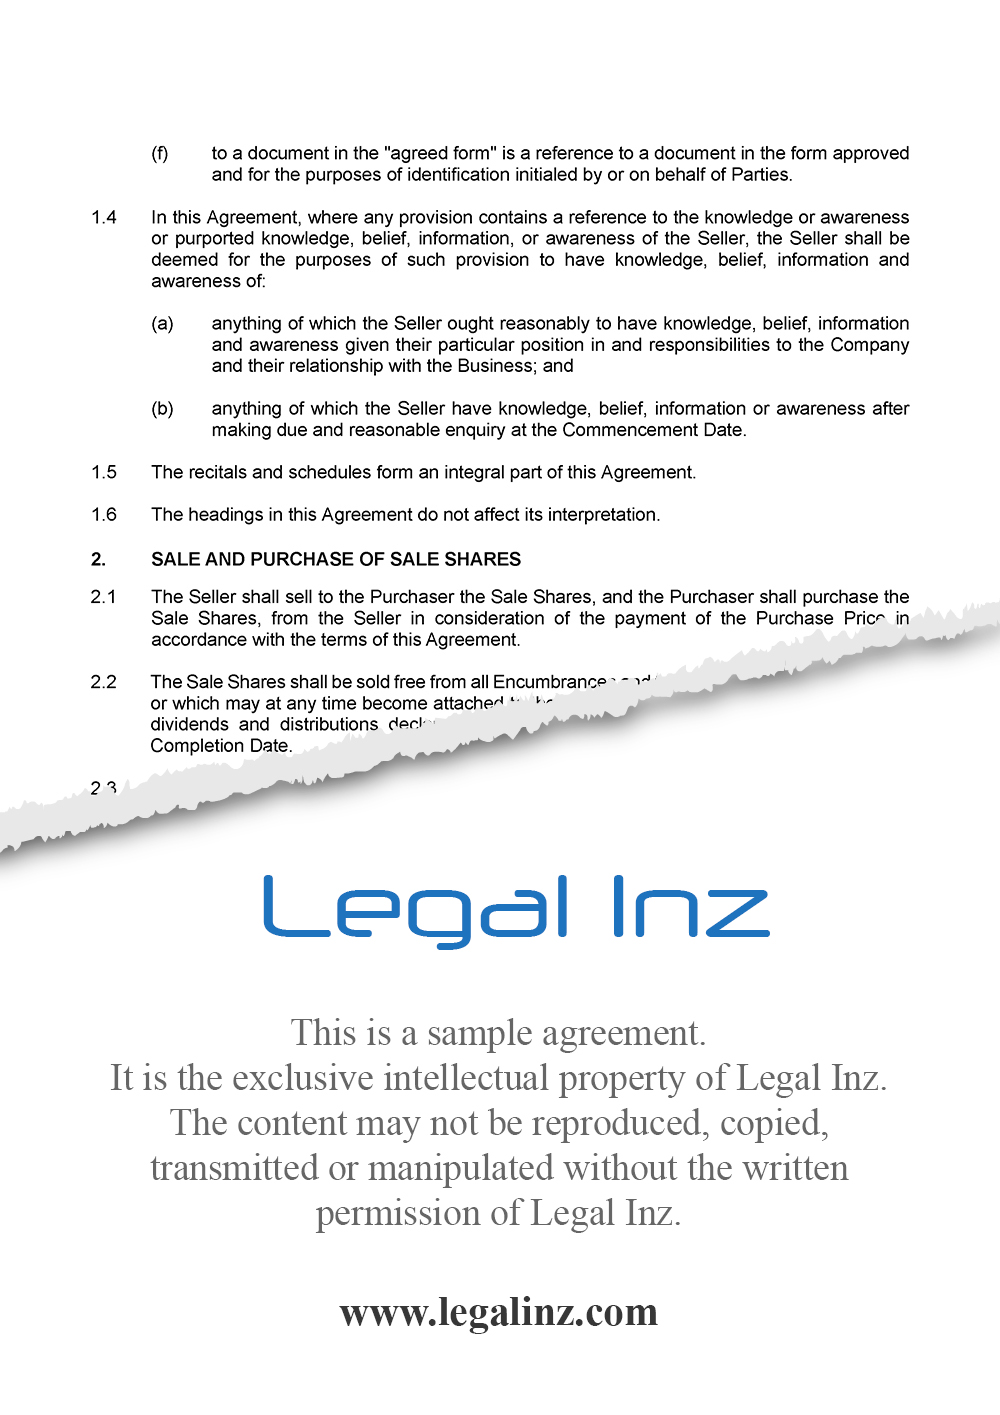 Share Purchase Agreement Sample 4